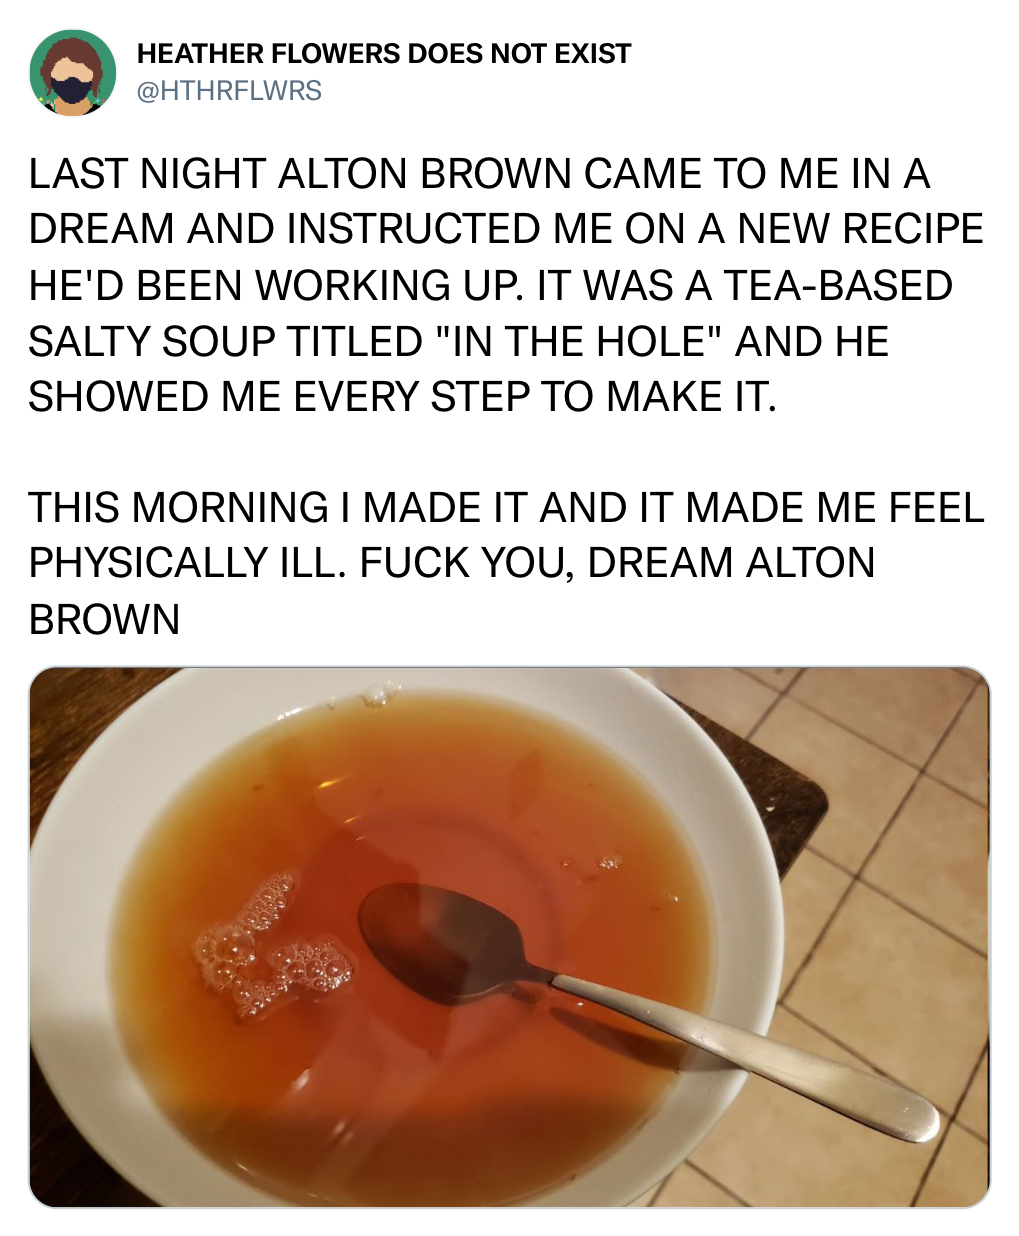 funny tweets - recipe - Heather Flowers Does Not Exist Last Night Alton Brown Came To Me In A Dream And Instructed Me On A New Recipe He'D Been Working Up. It Was A TeaBased Salty Soup Titled "In The Hole" And He Showed Me Every Step To Make It. This Morn